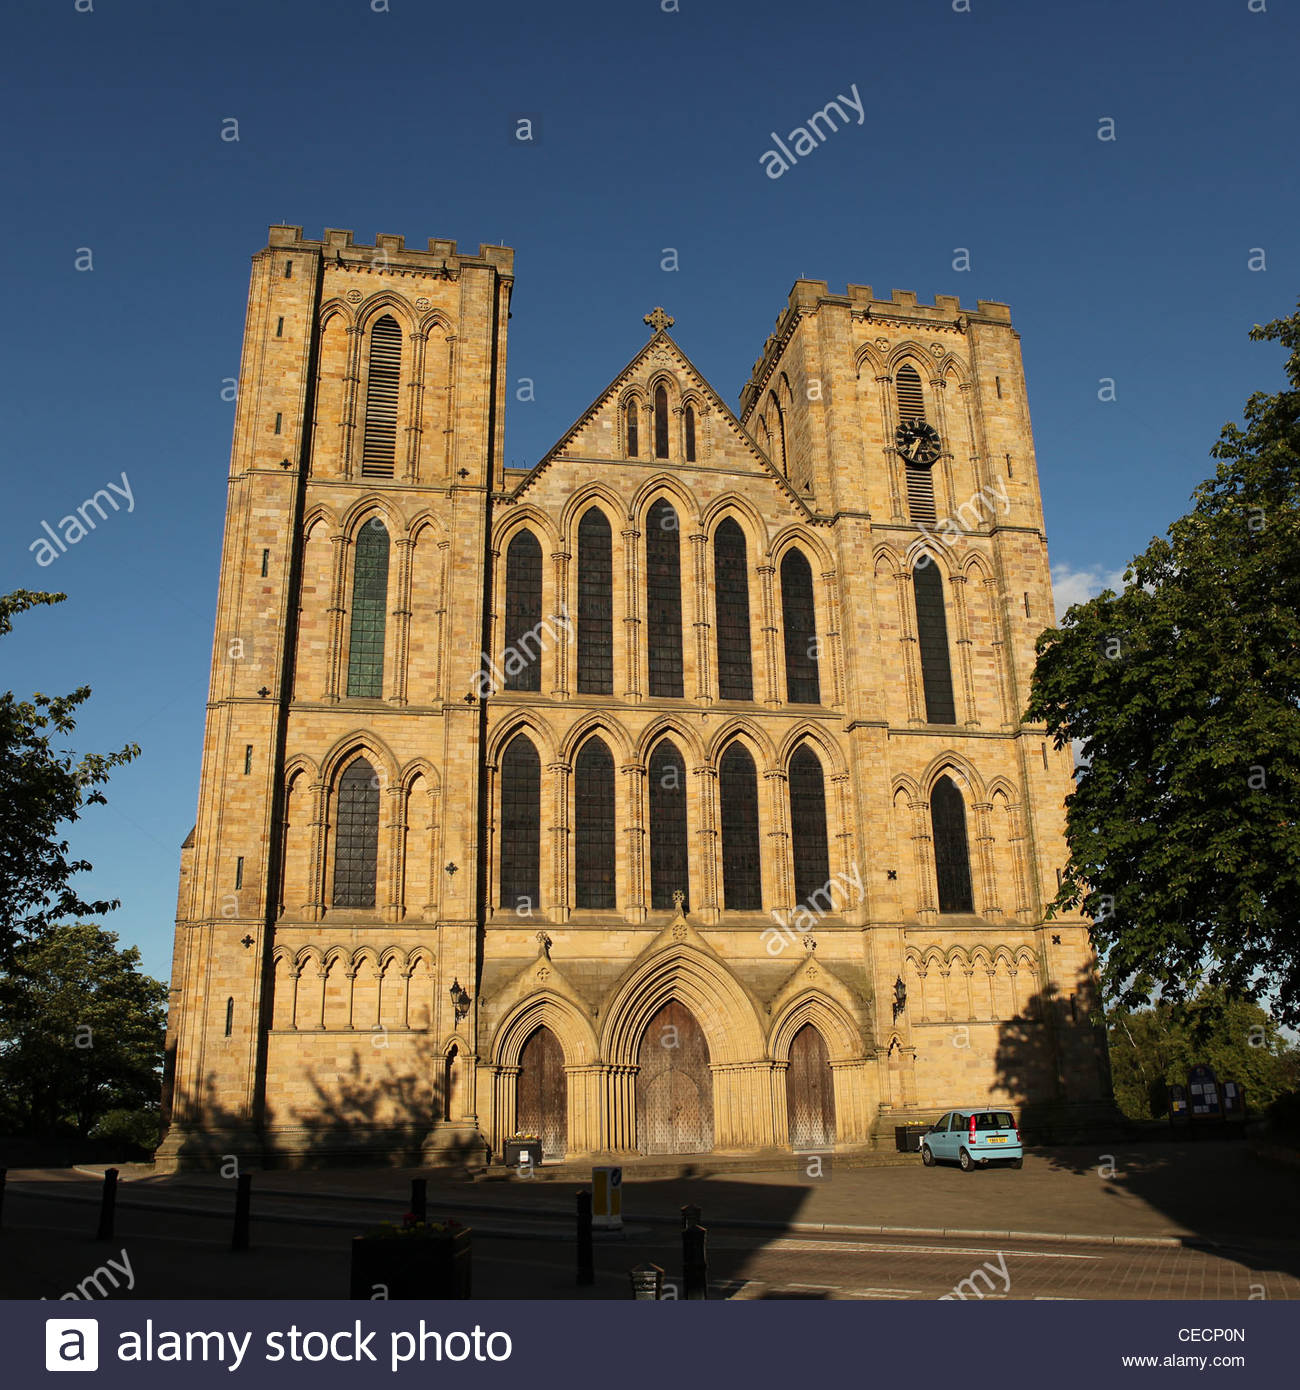 Images of Ripon Cathedral | 1300x1390